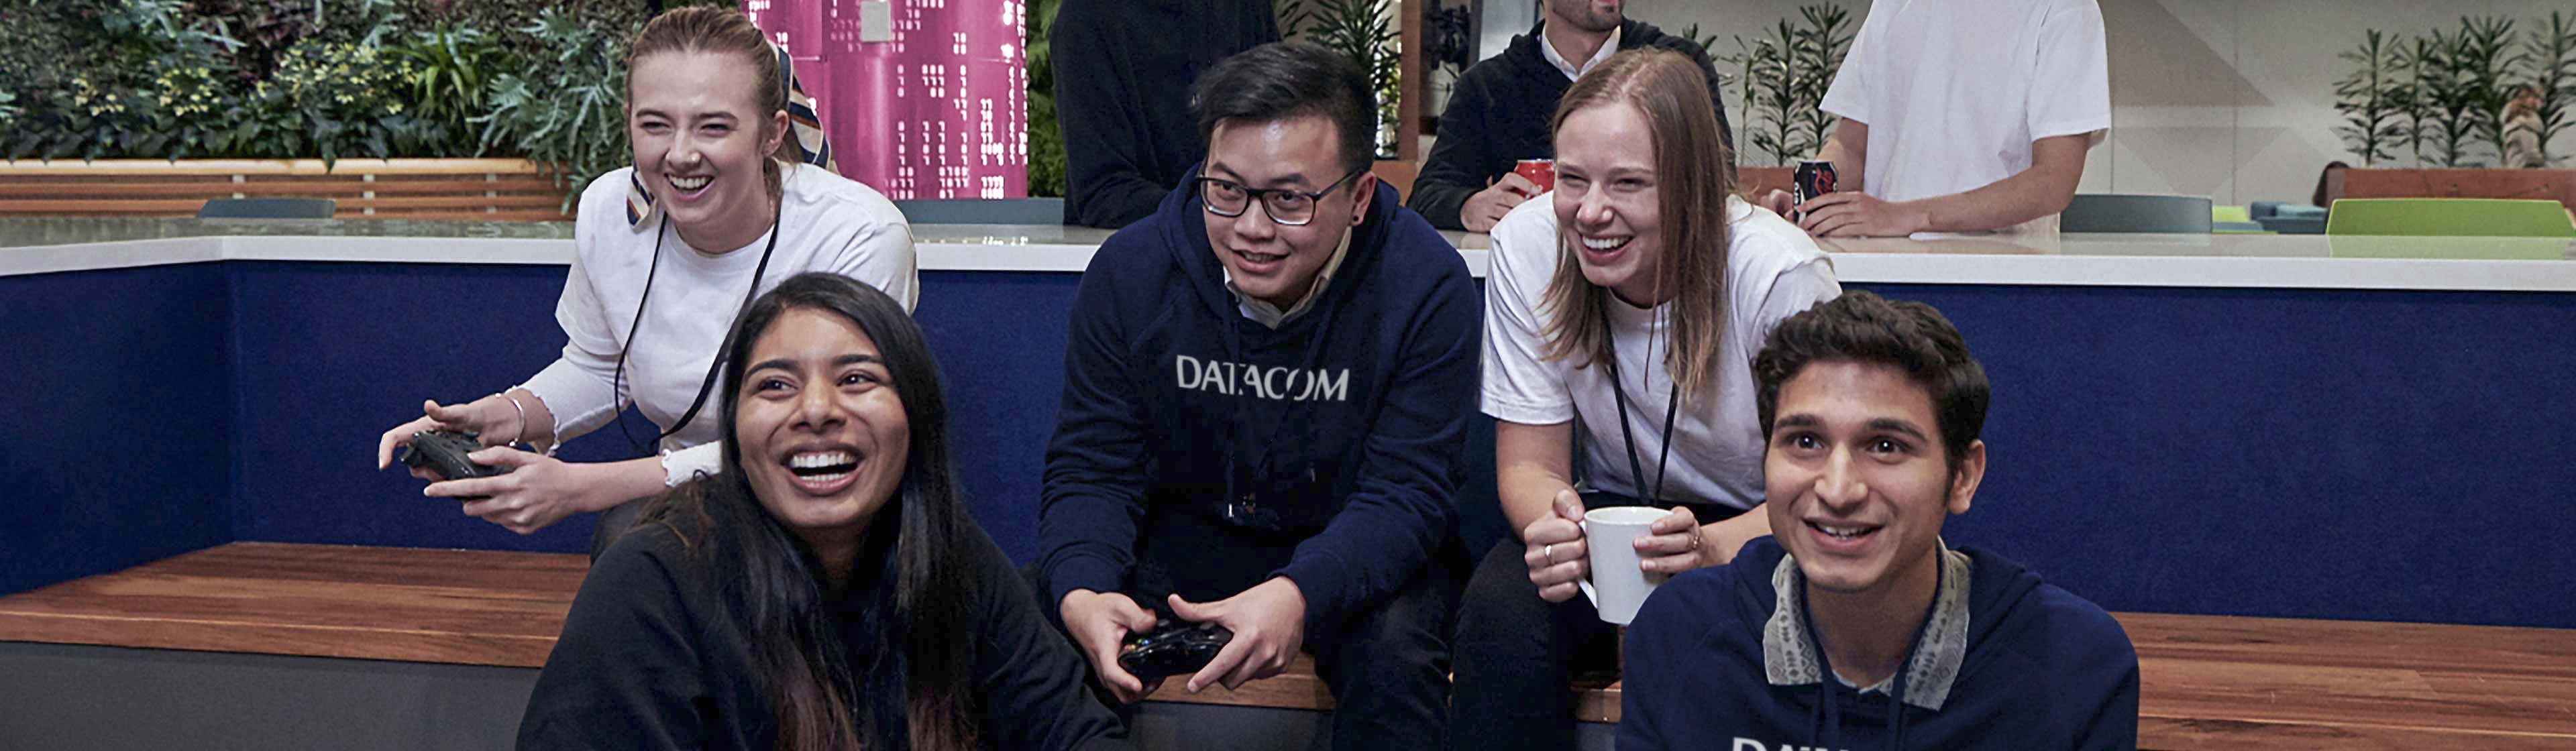 Datacom people playing games at the Datacom office in Auckland